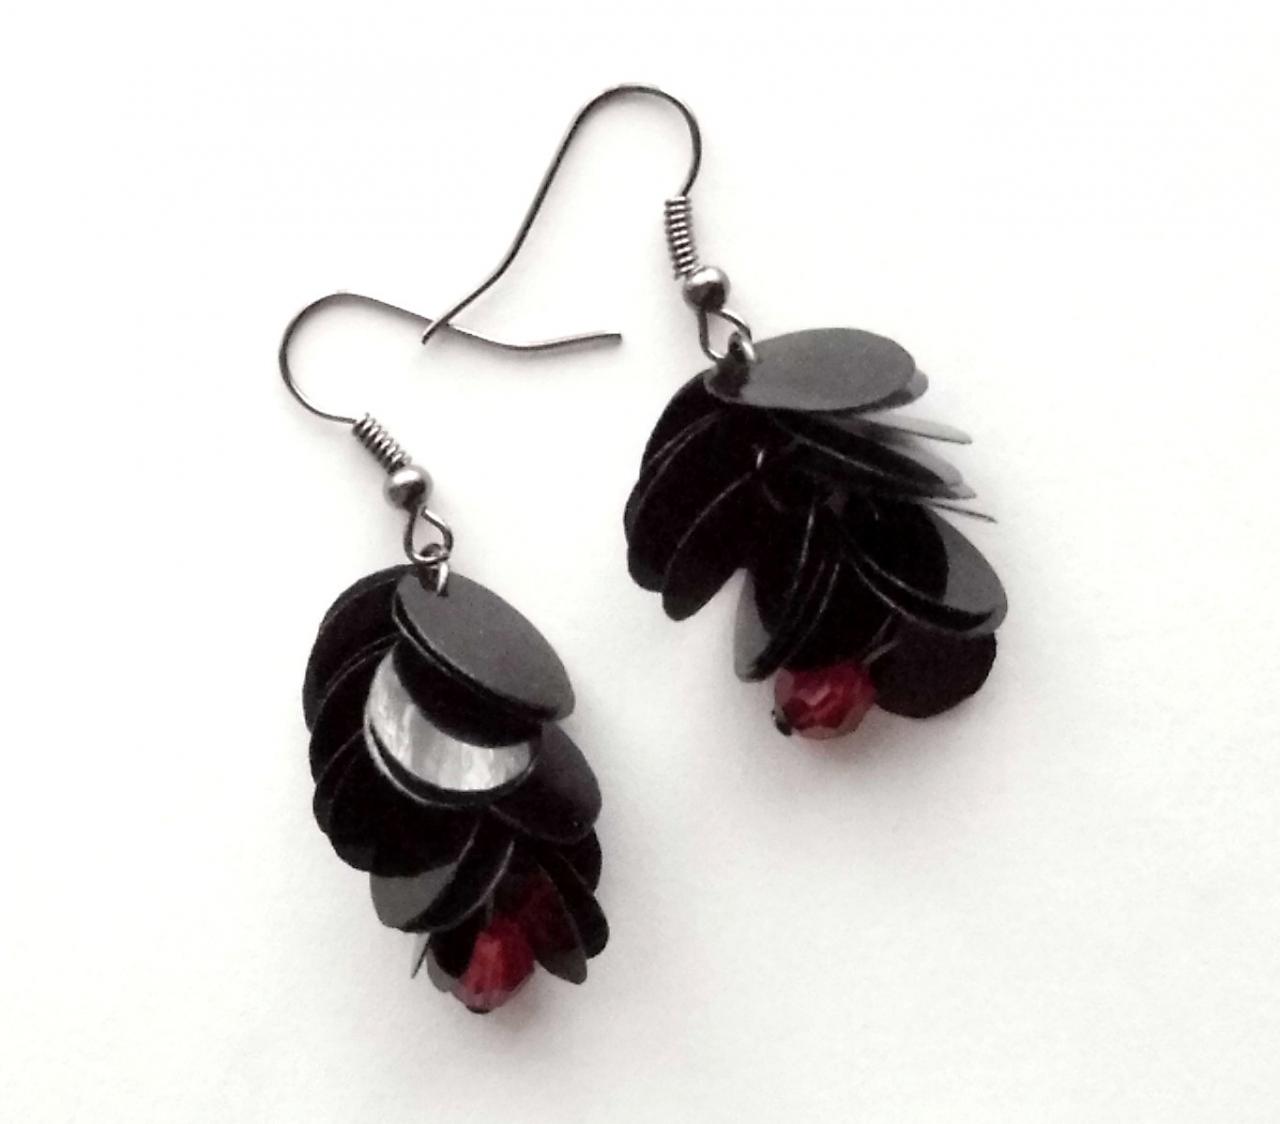 Gothic Earrings Made Of Recycled Plastic Bottle Upcycled Jewelry, Black & Red Upcycled Earrings, Sustainable, Eco-friendly